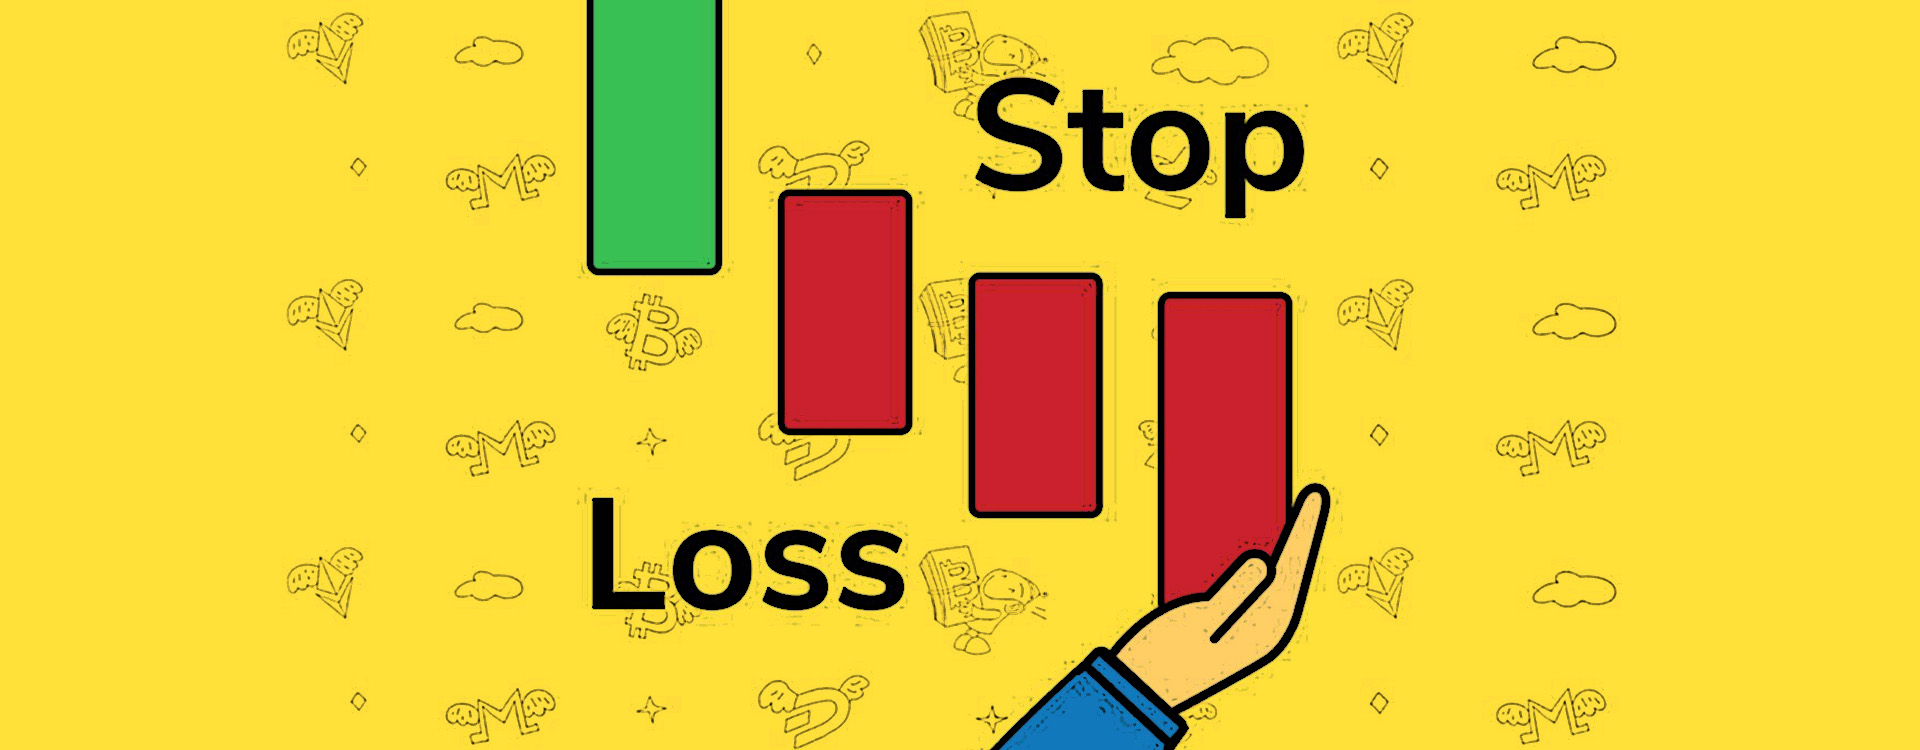 Stop Loss vs. Stop Limit Order: Which is better?